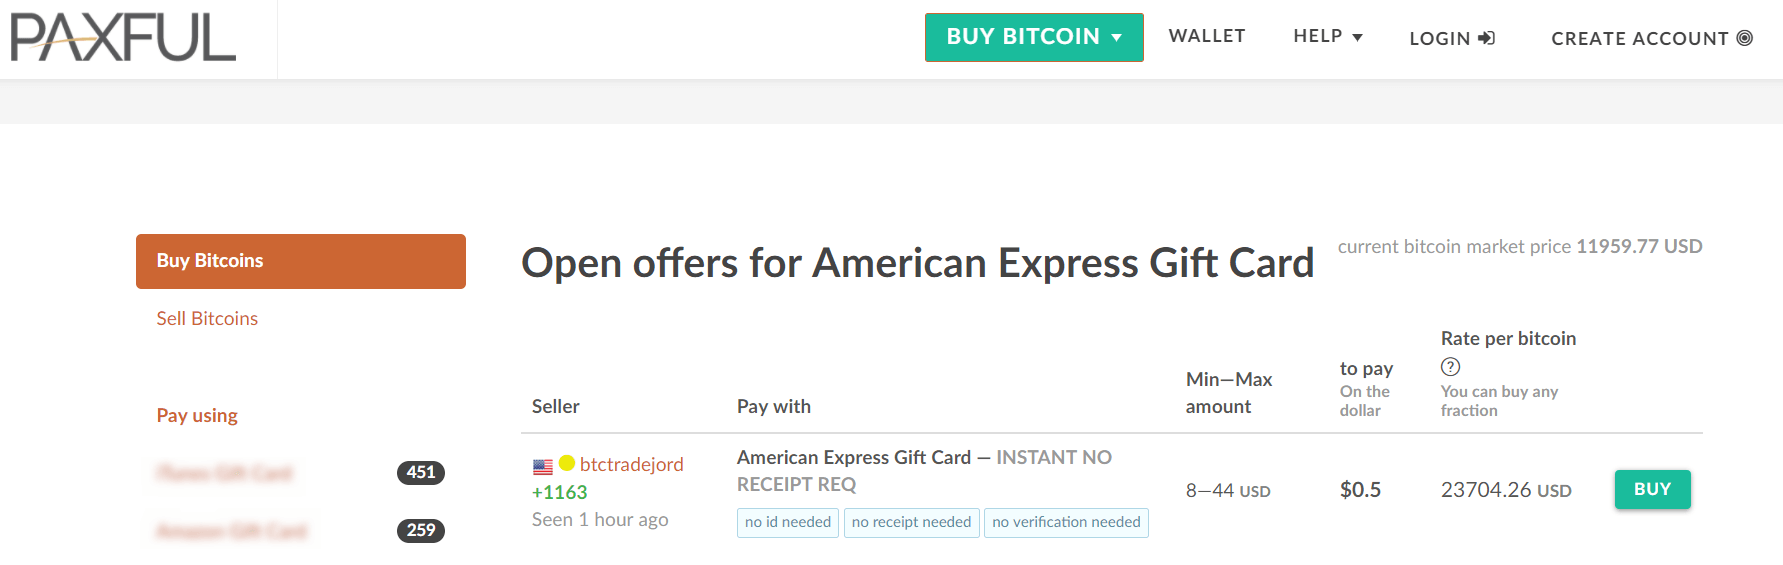 Buy BTC with American Express gift card at Paxful